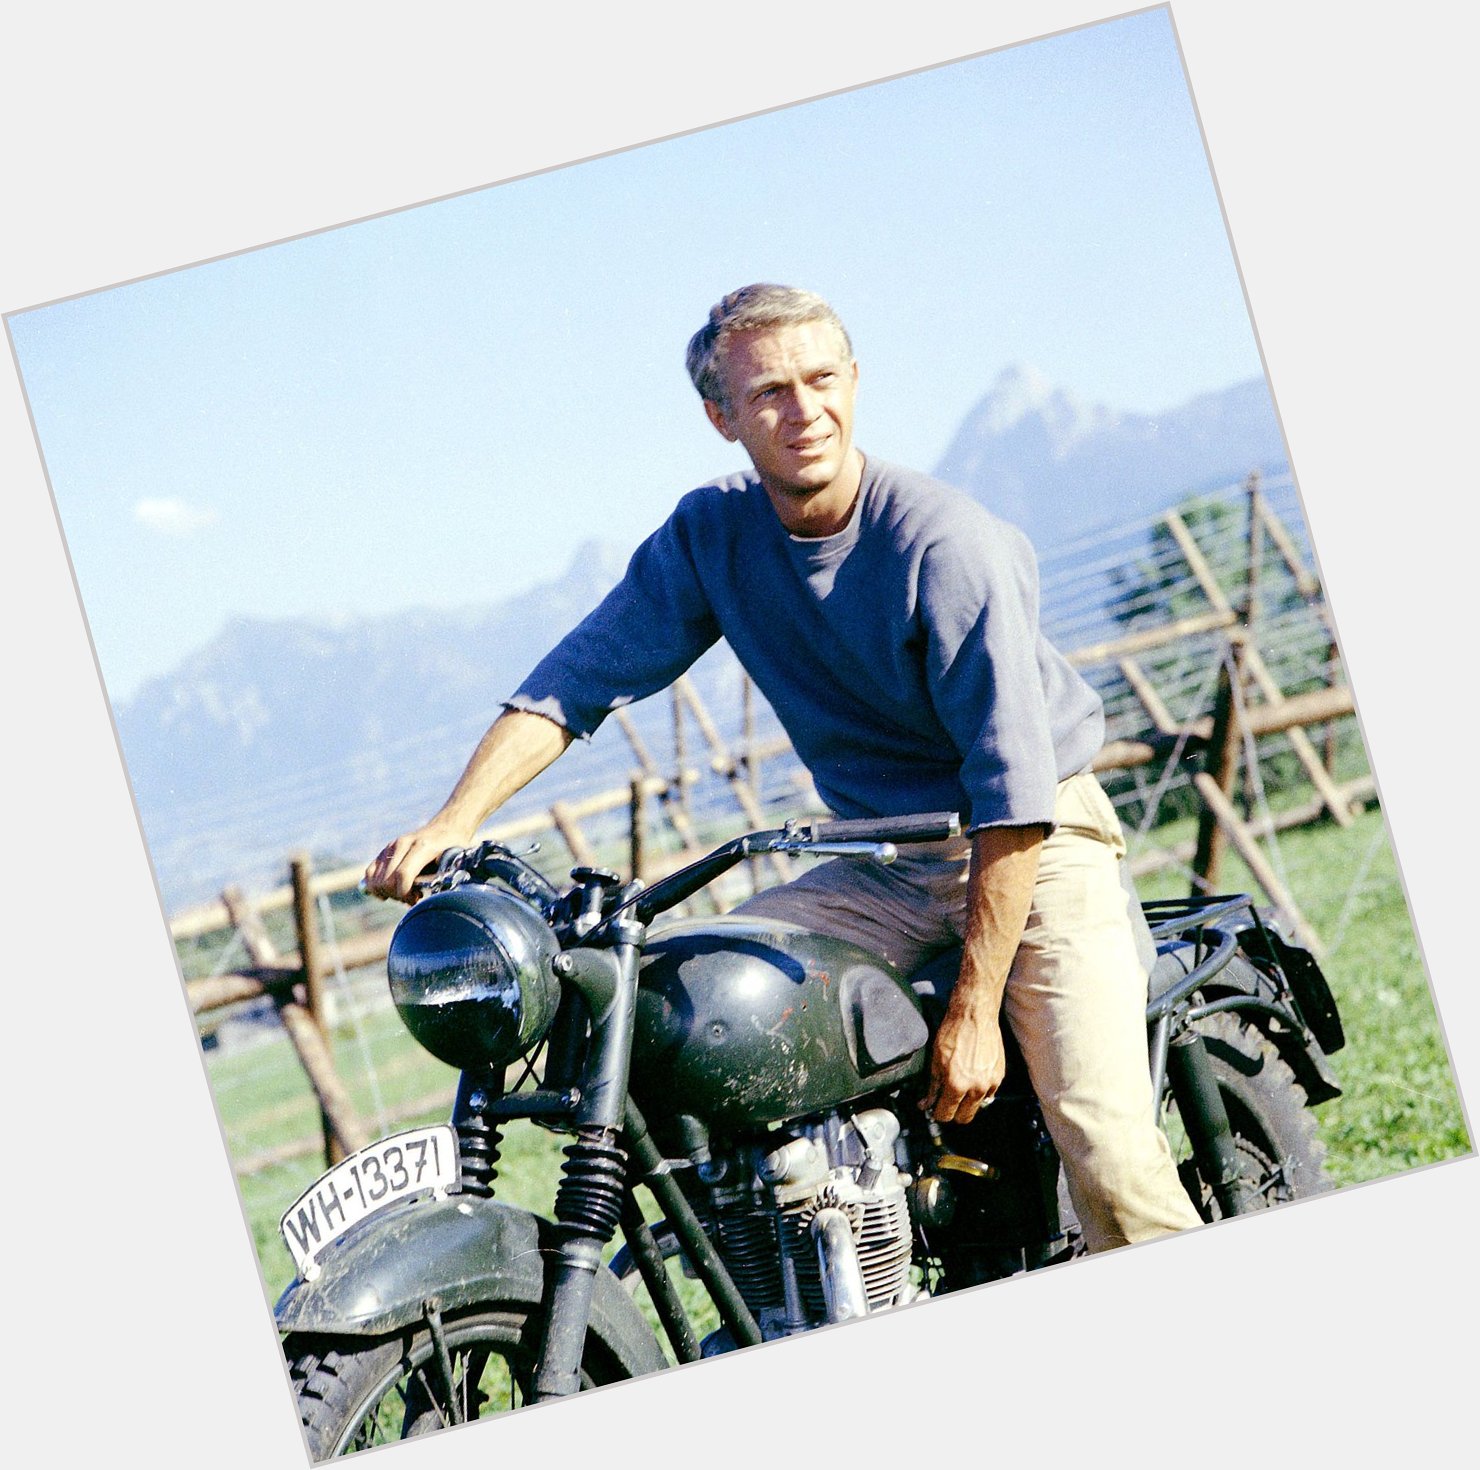  Also, a happy coincidence, Steve McQueen\s birthday. 